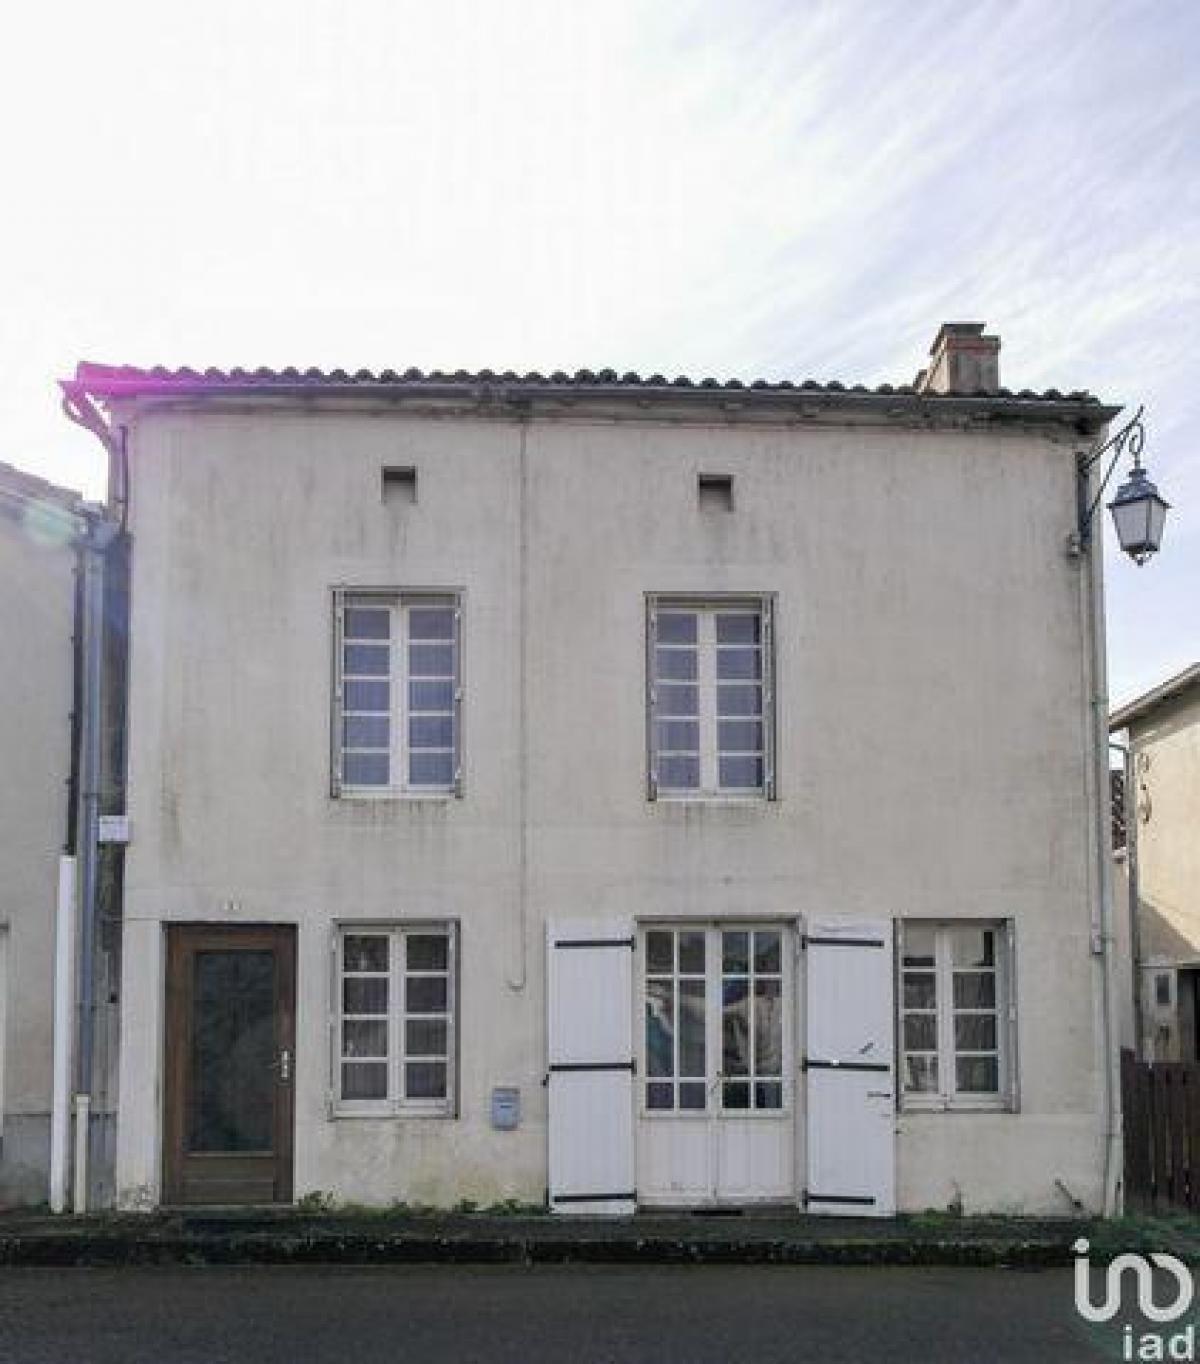 Picture of Home For Sale in Chateau Garnier, Poitou Charentes, France